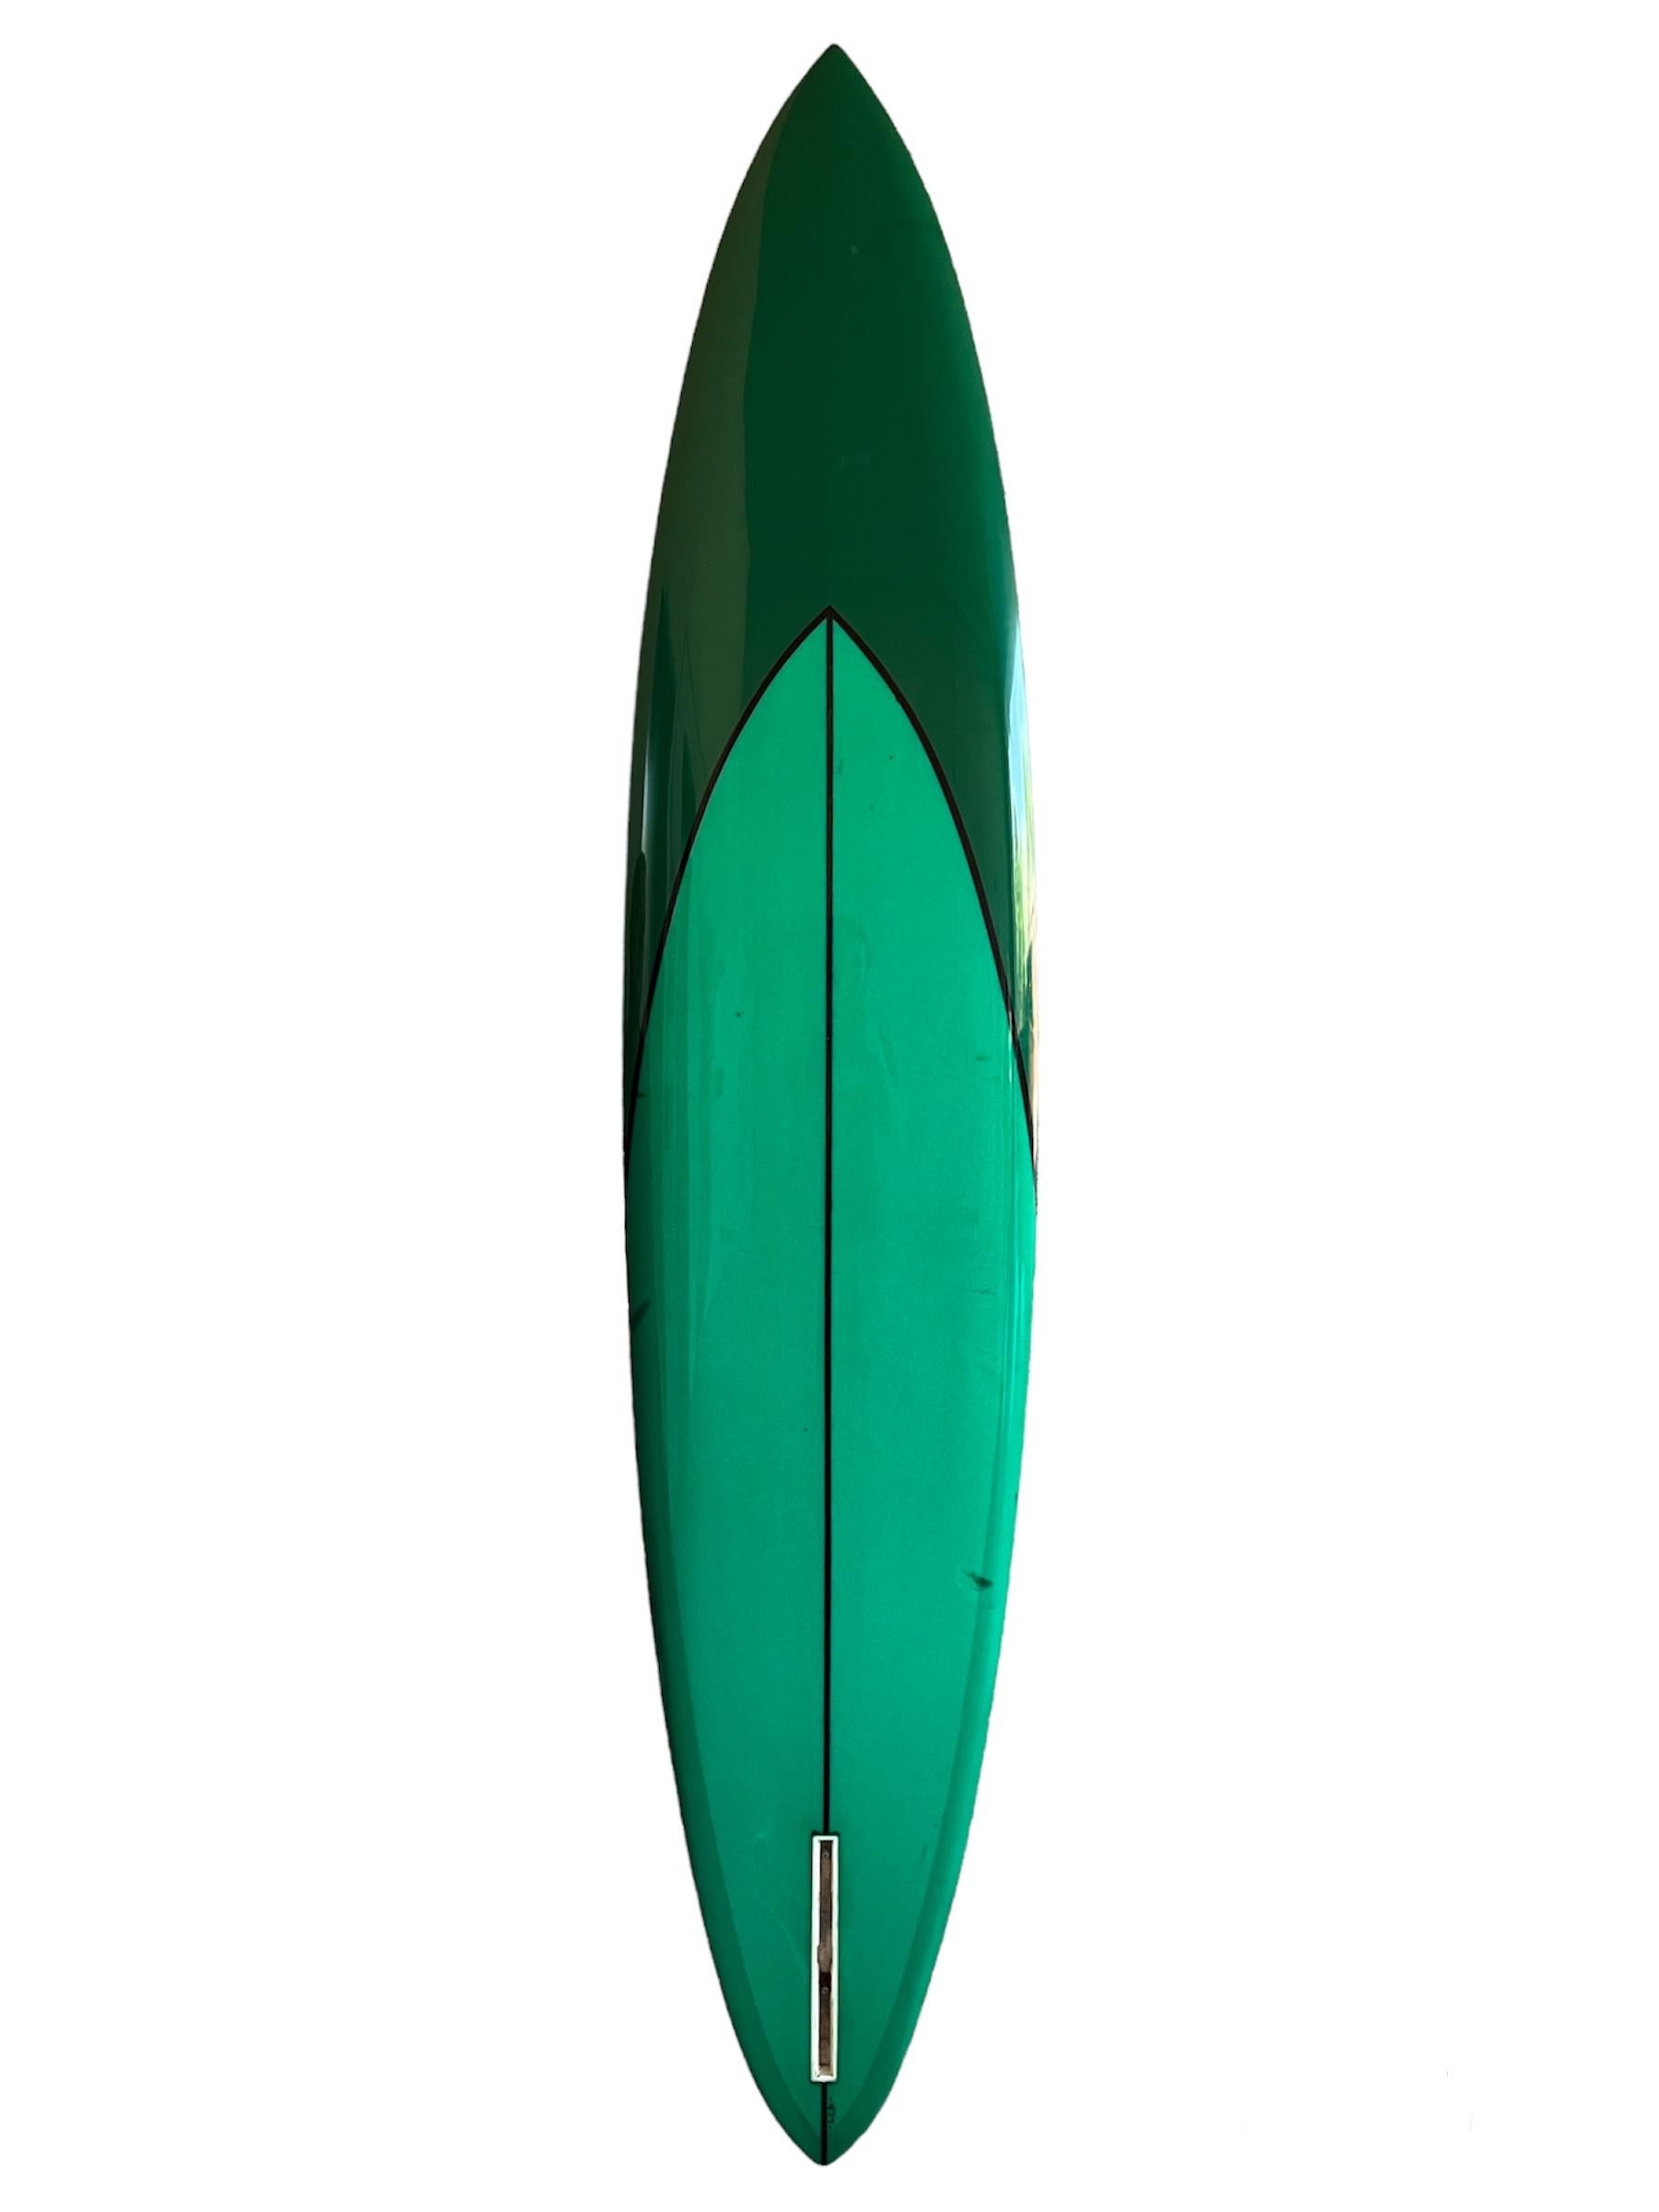 1969 Vintage Greg Noll Ben Aipa Surf Center Hawaii transitional era surfboard. Shaped by the late Ben Aipa (1942-2021). Features beautiful tint of sea foam green complimented by dark green accents with black pinstriping. Classoc transitional era